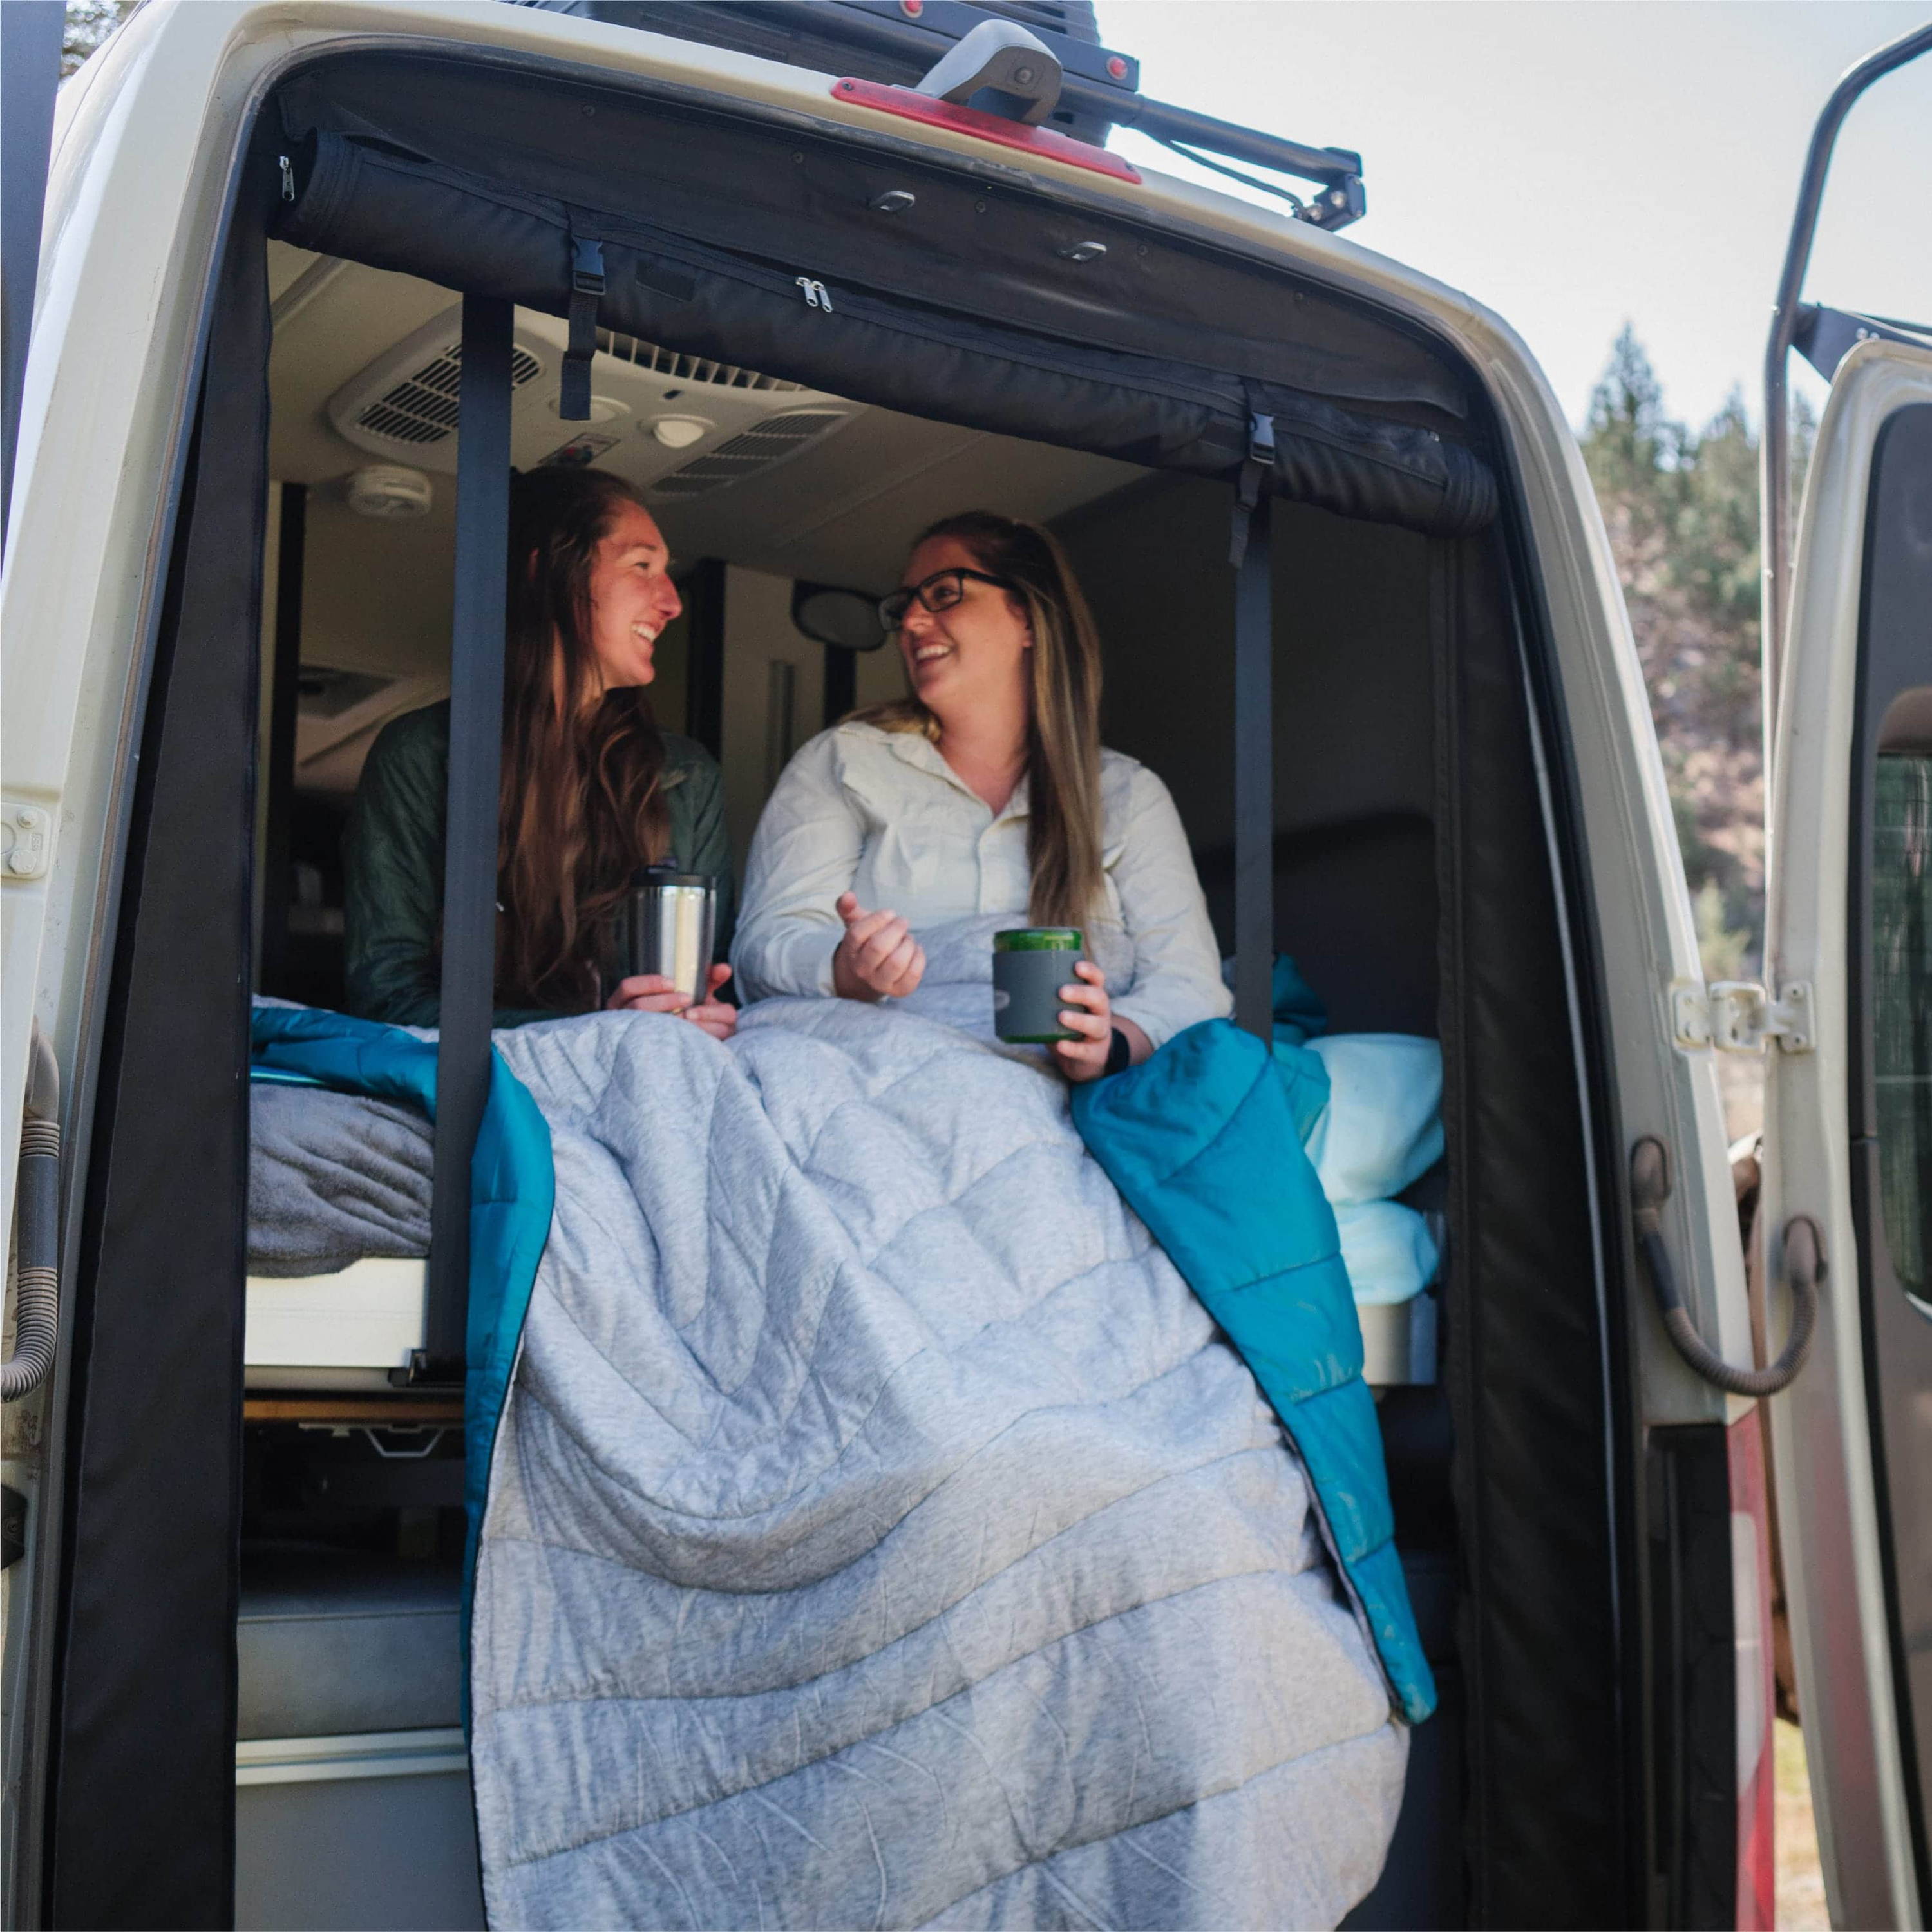 Two Women Drinking Coffee Outside Of Back Of Car While Wrapped In an Original Puffy Blanket